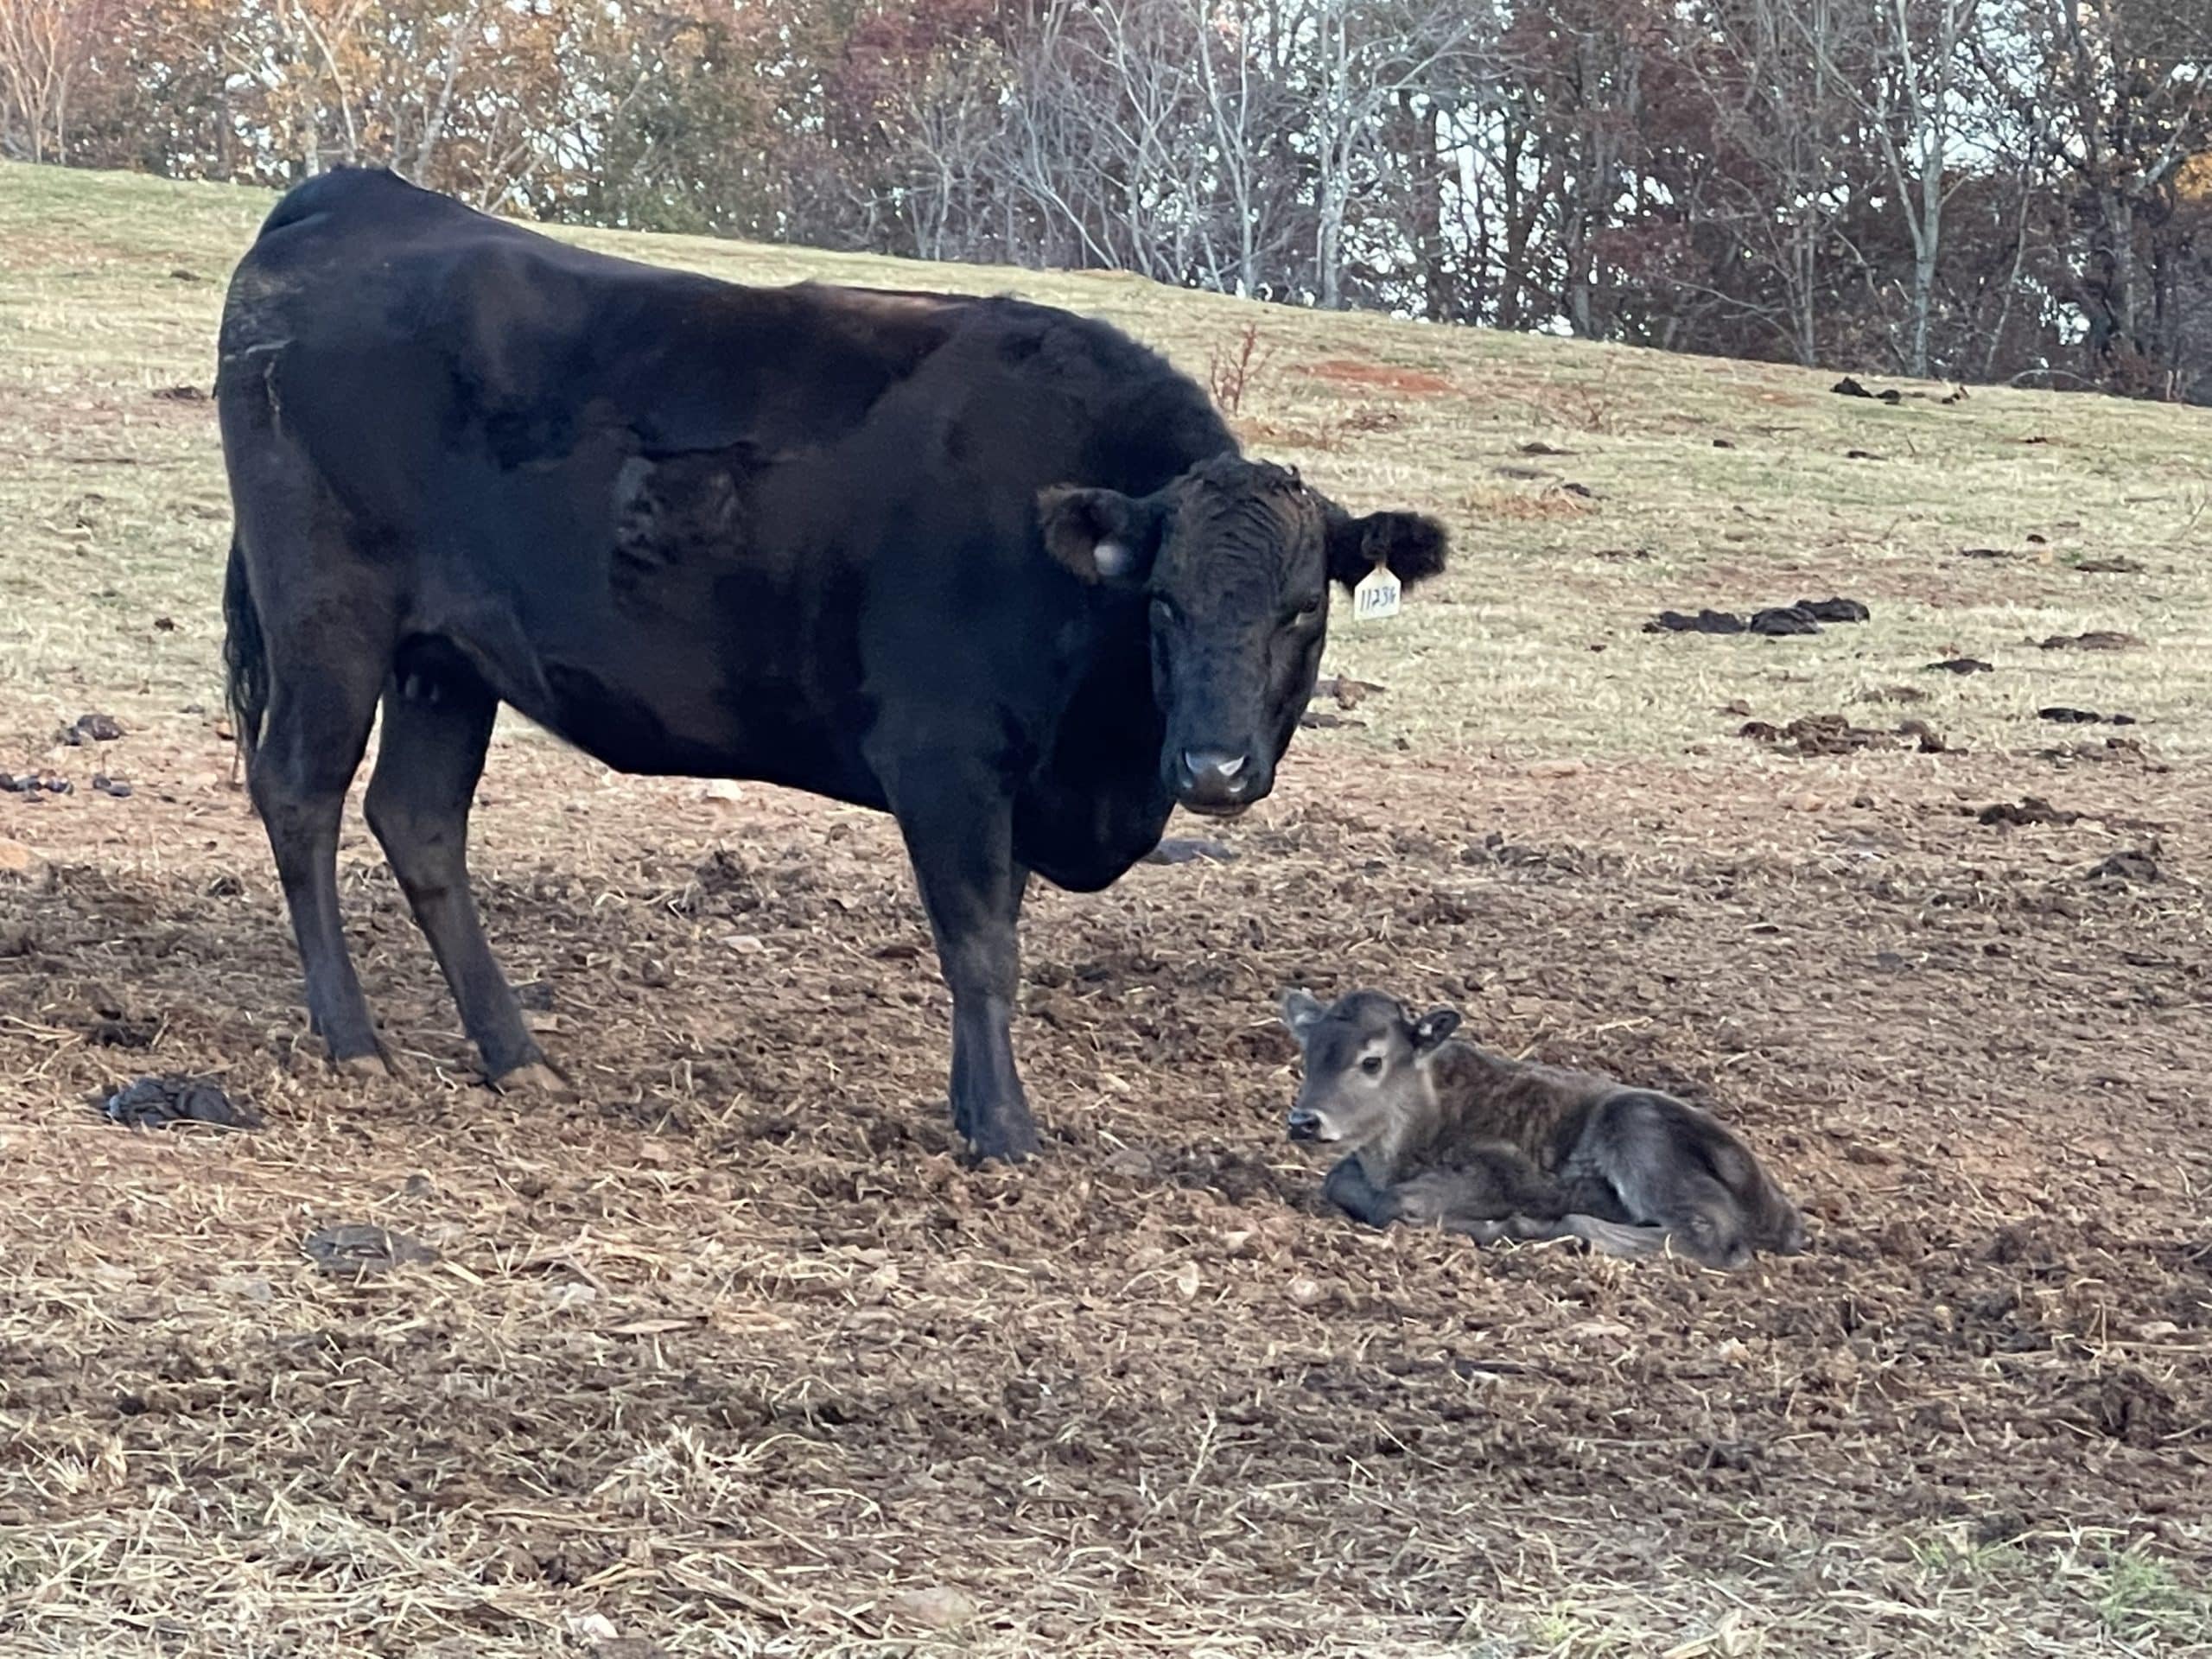 A cow stands across from its calf, that is sitting down in a pasture.